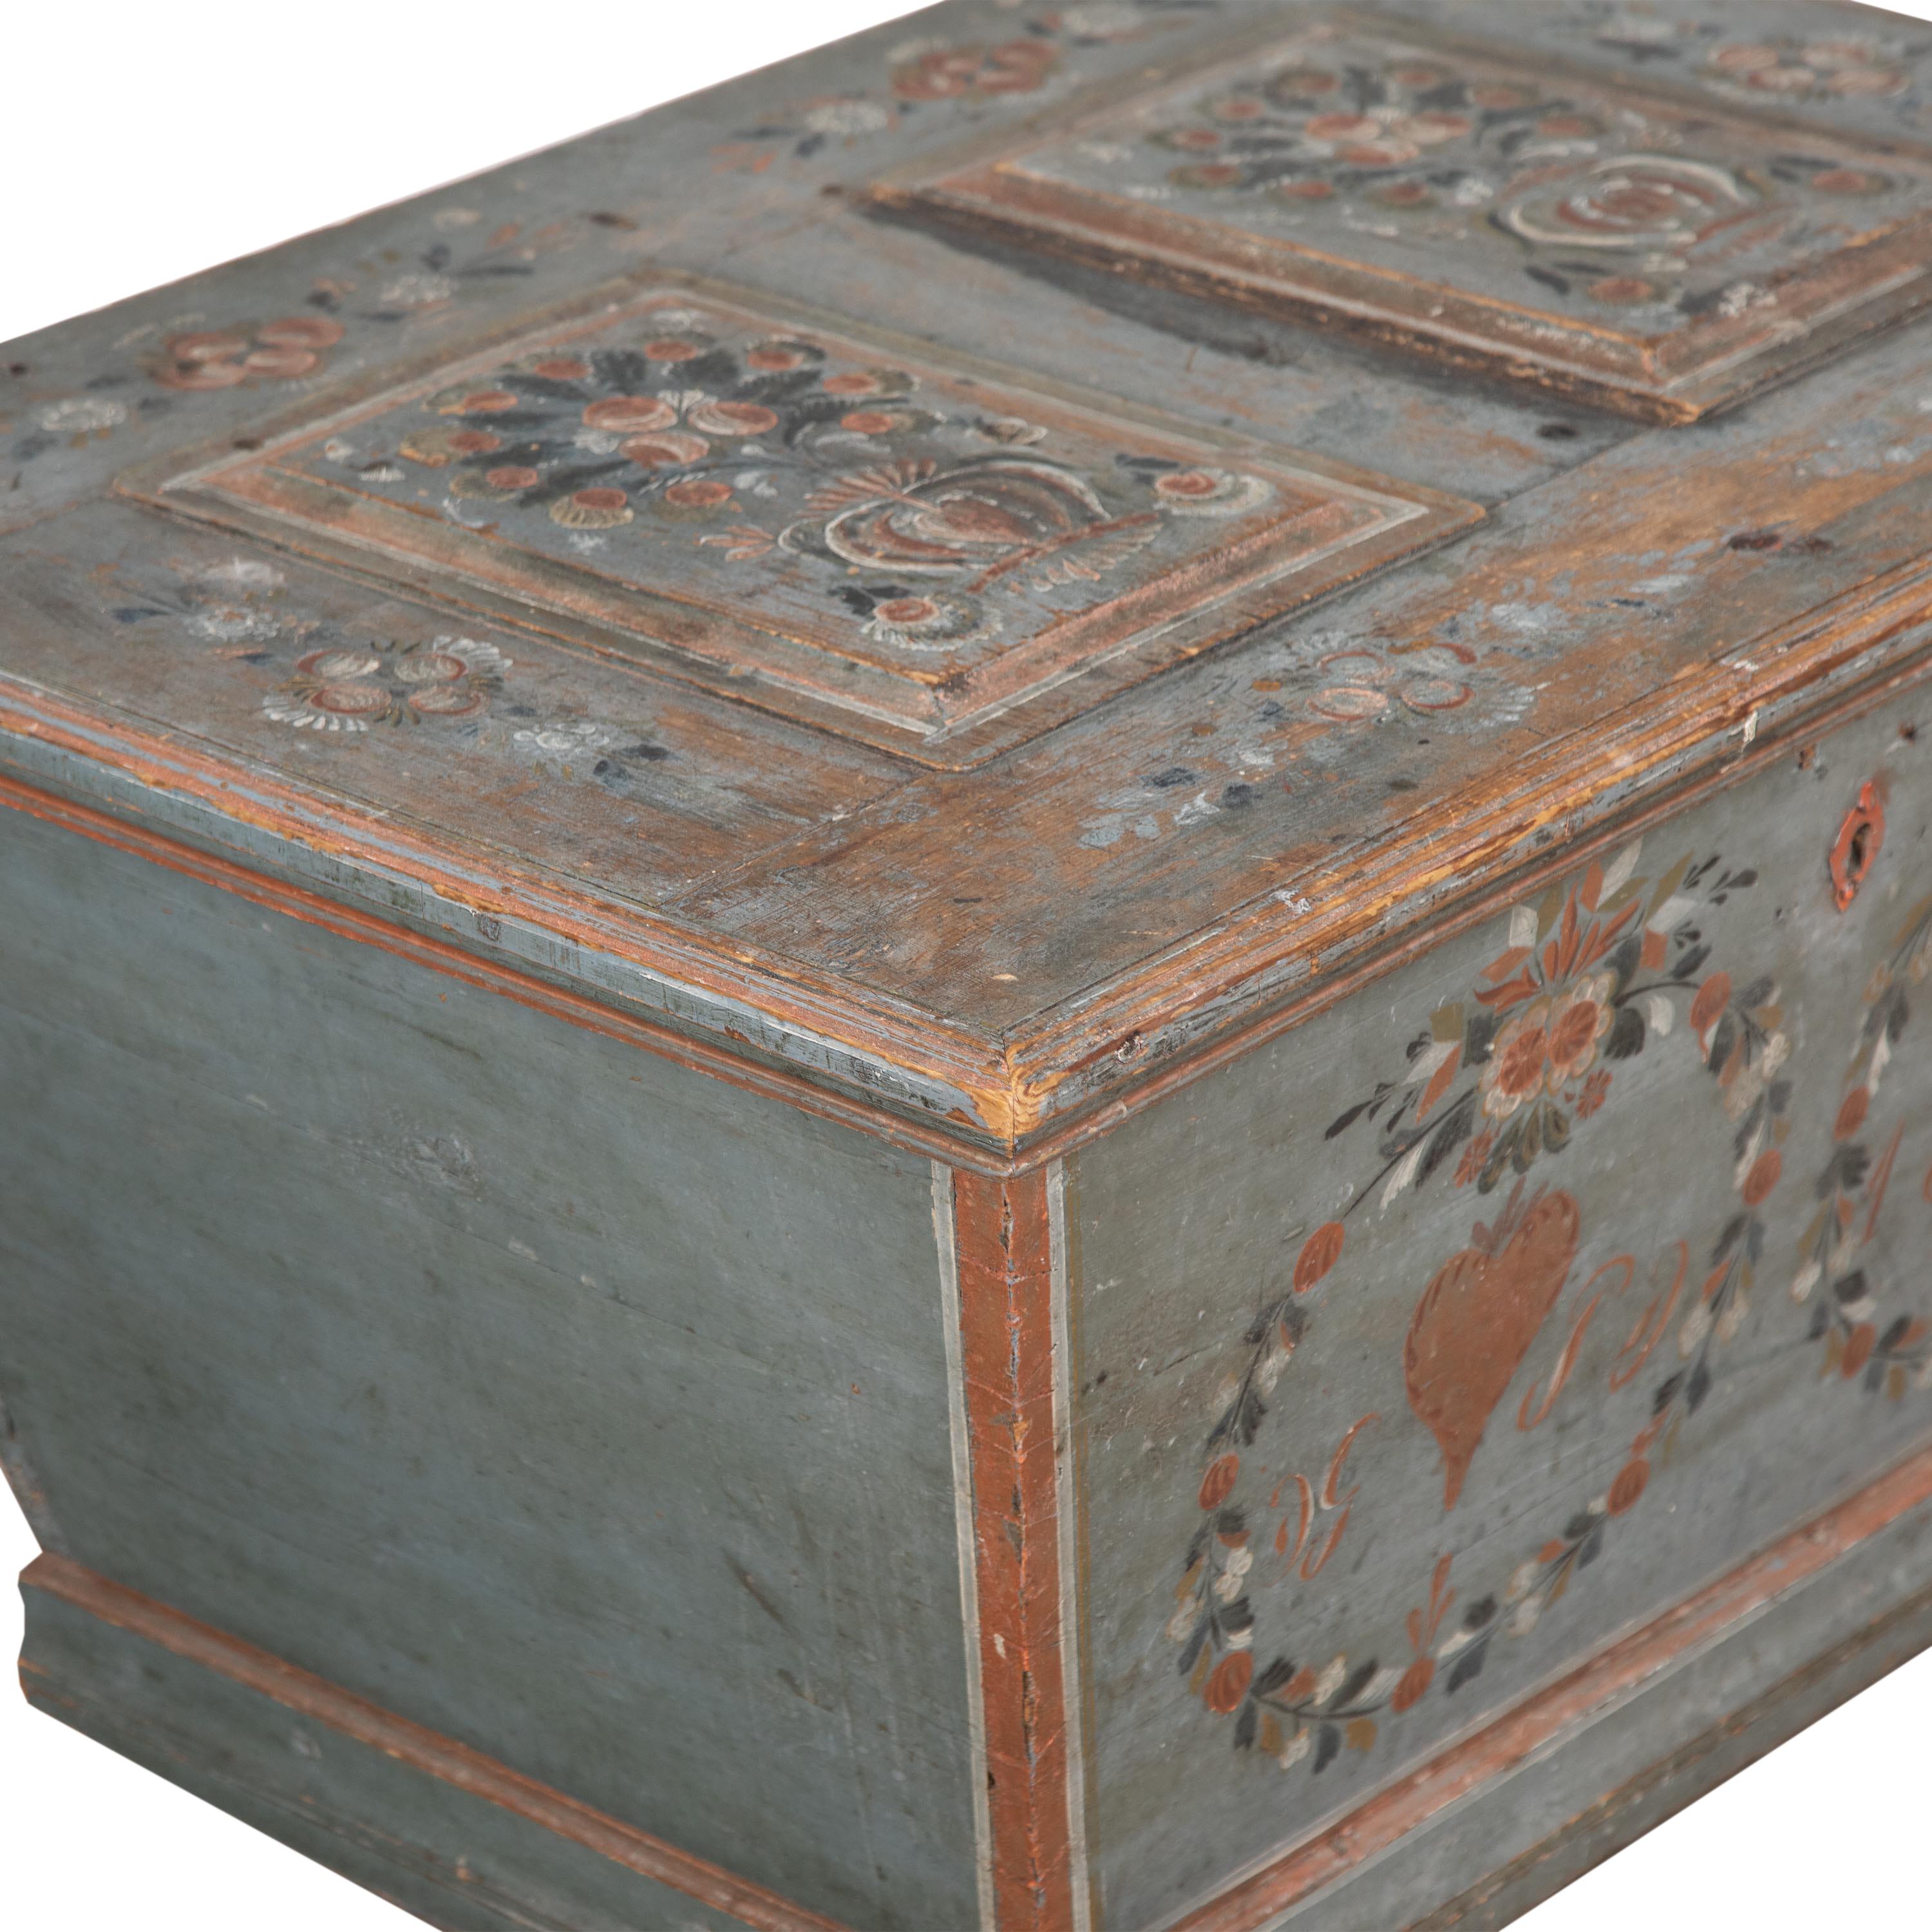 19th century Swedish marriage chest.
This chest is decorated with flora, fauna, and hearts and is dated 1834.